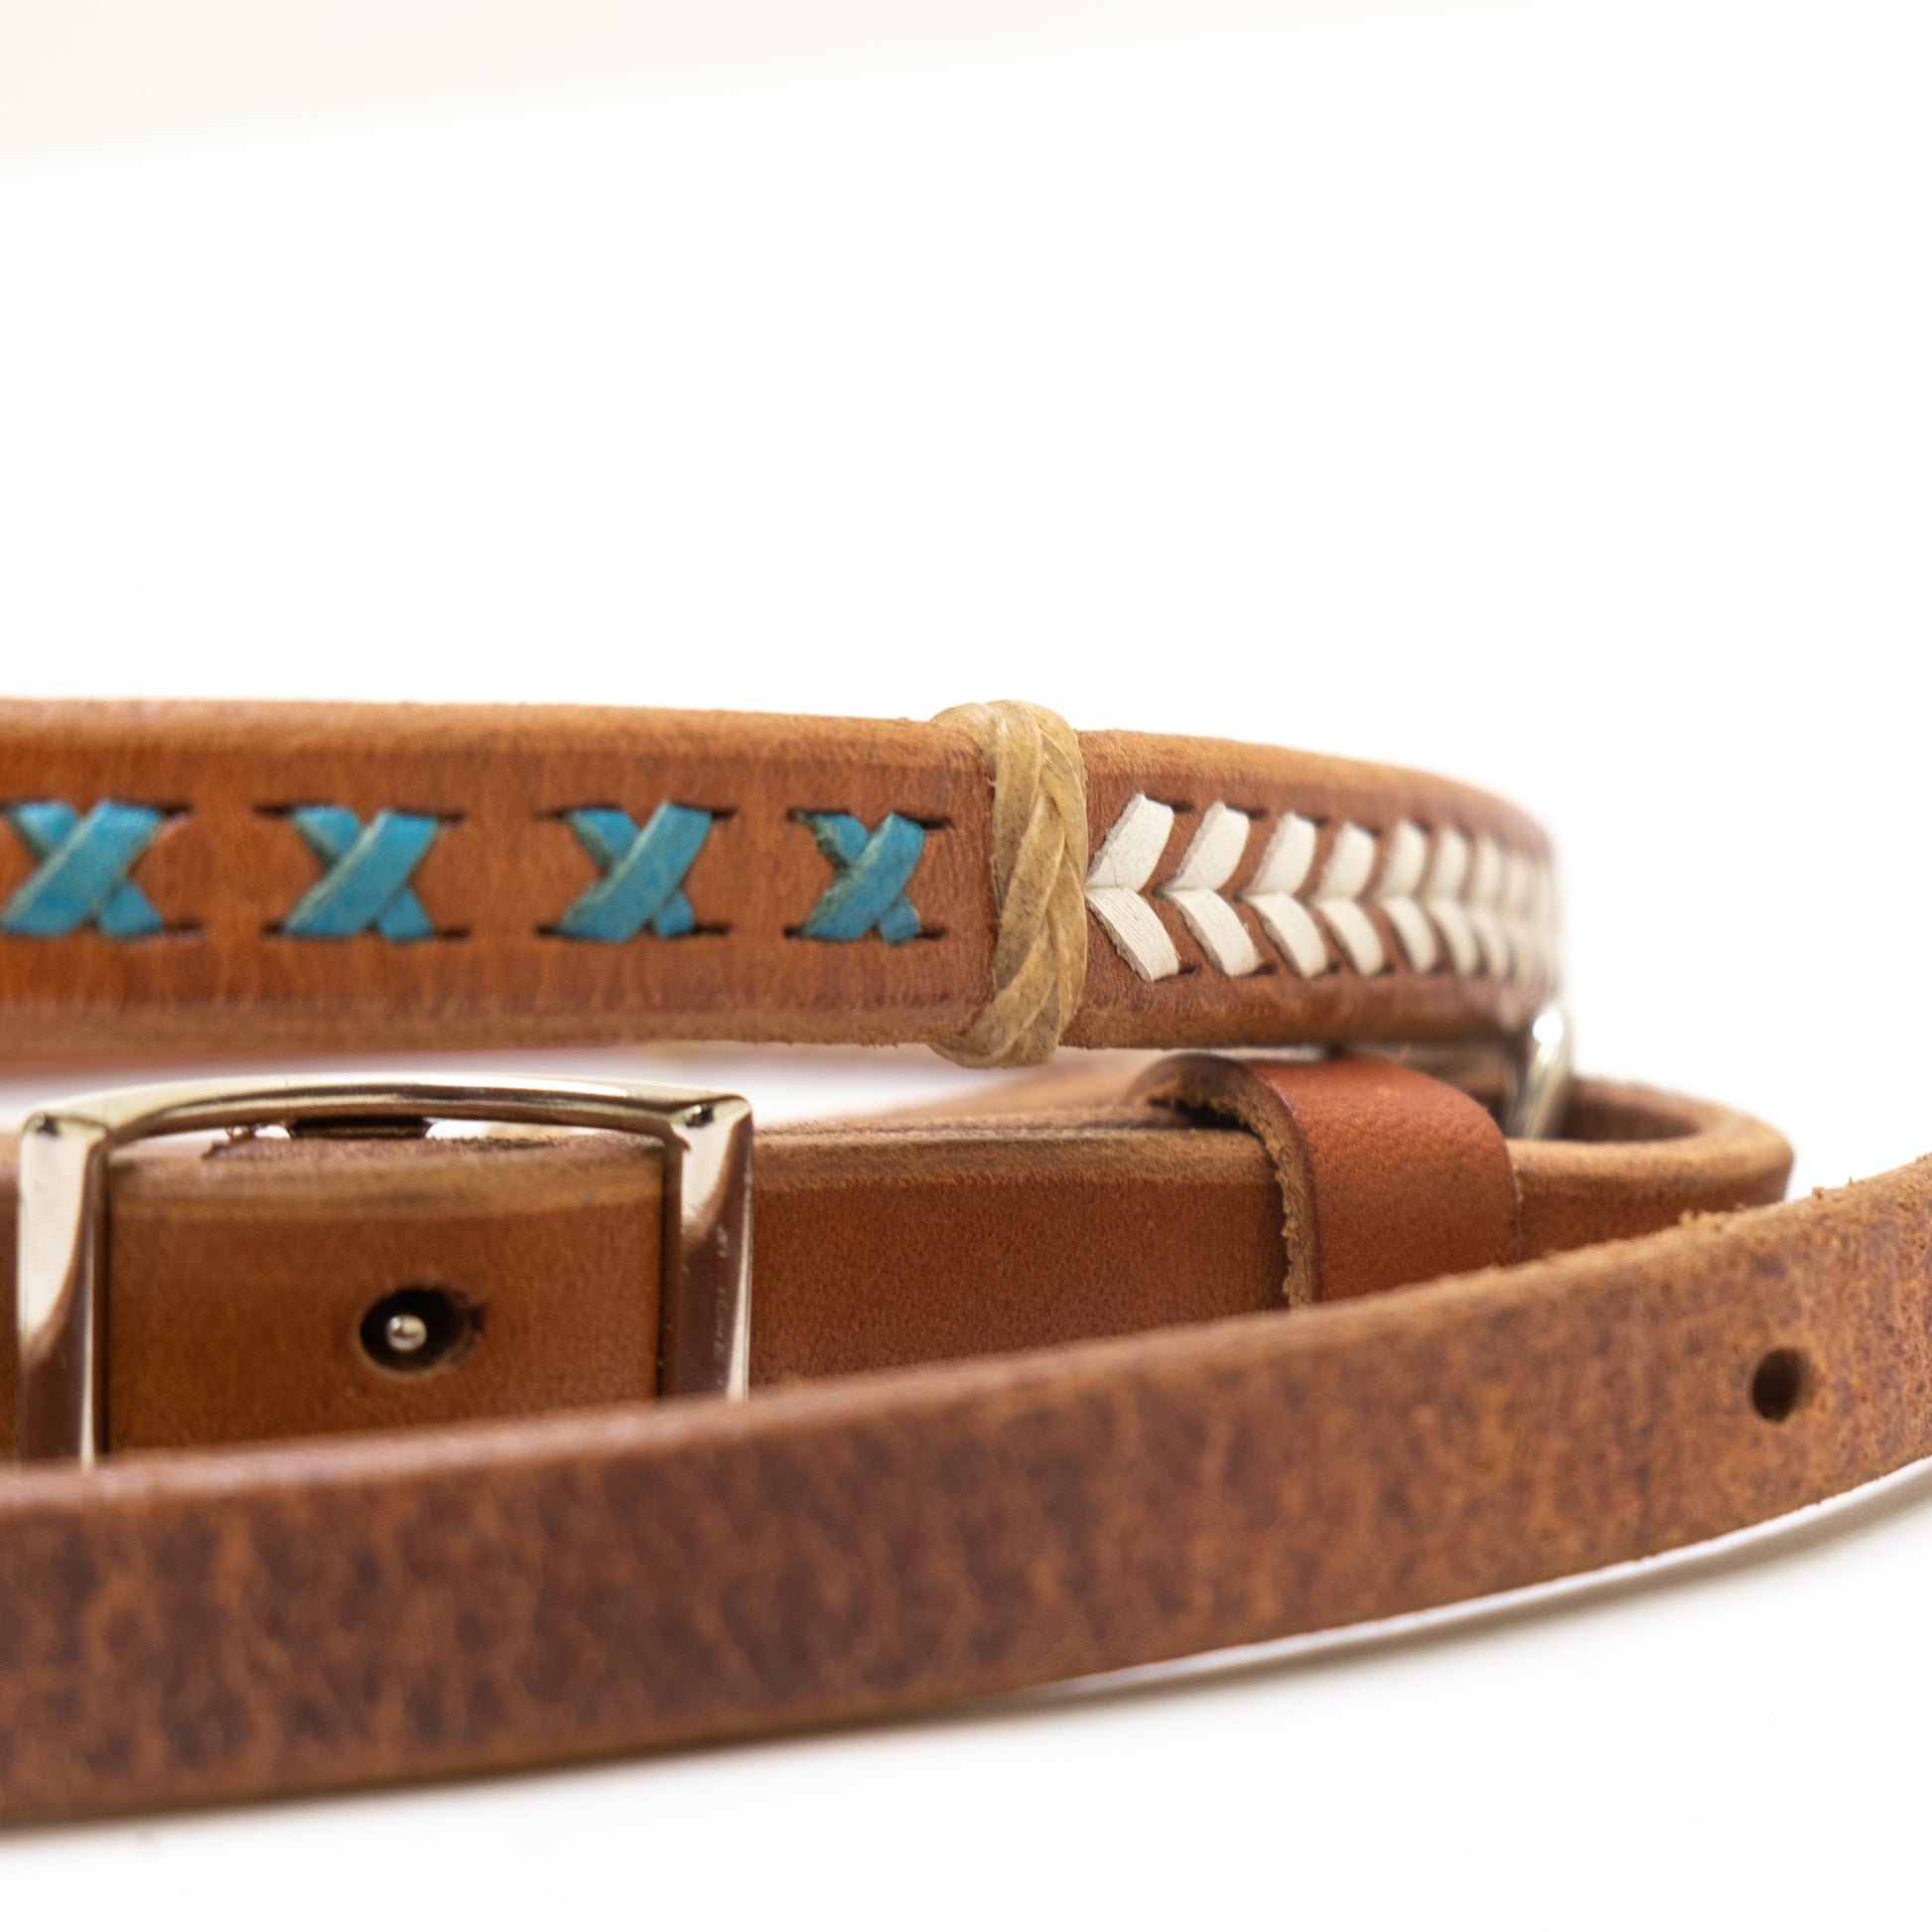 5/8" Sherrylyn Johnson barrel rein harness leather red, blue, and white lacing with rawhide braided dividers, and snaps.